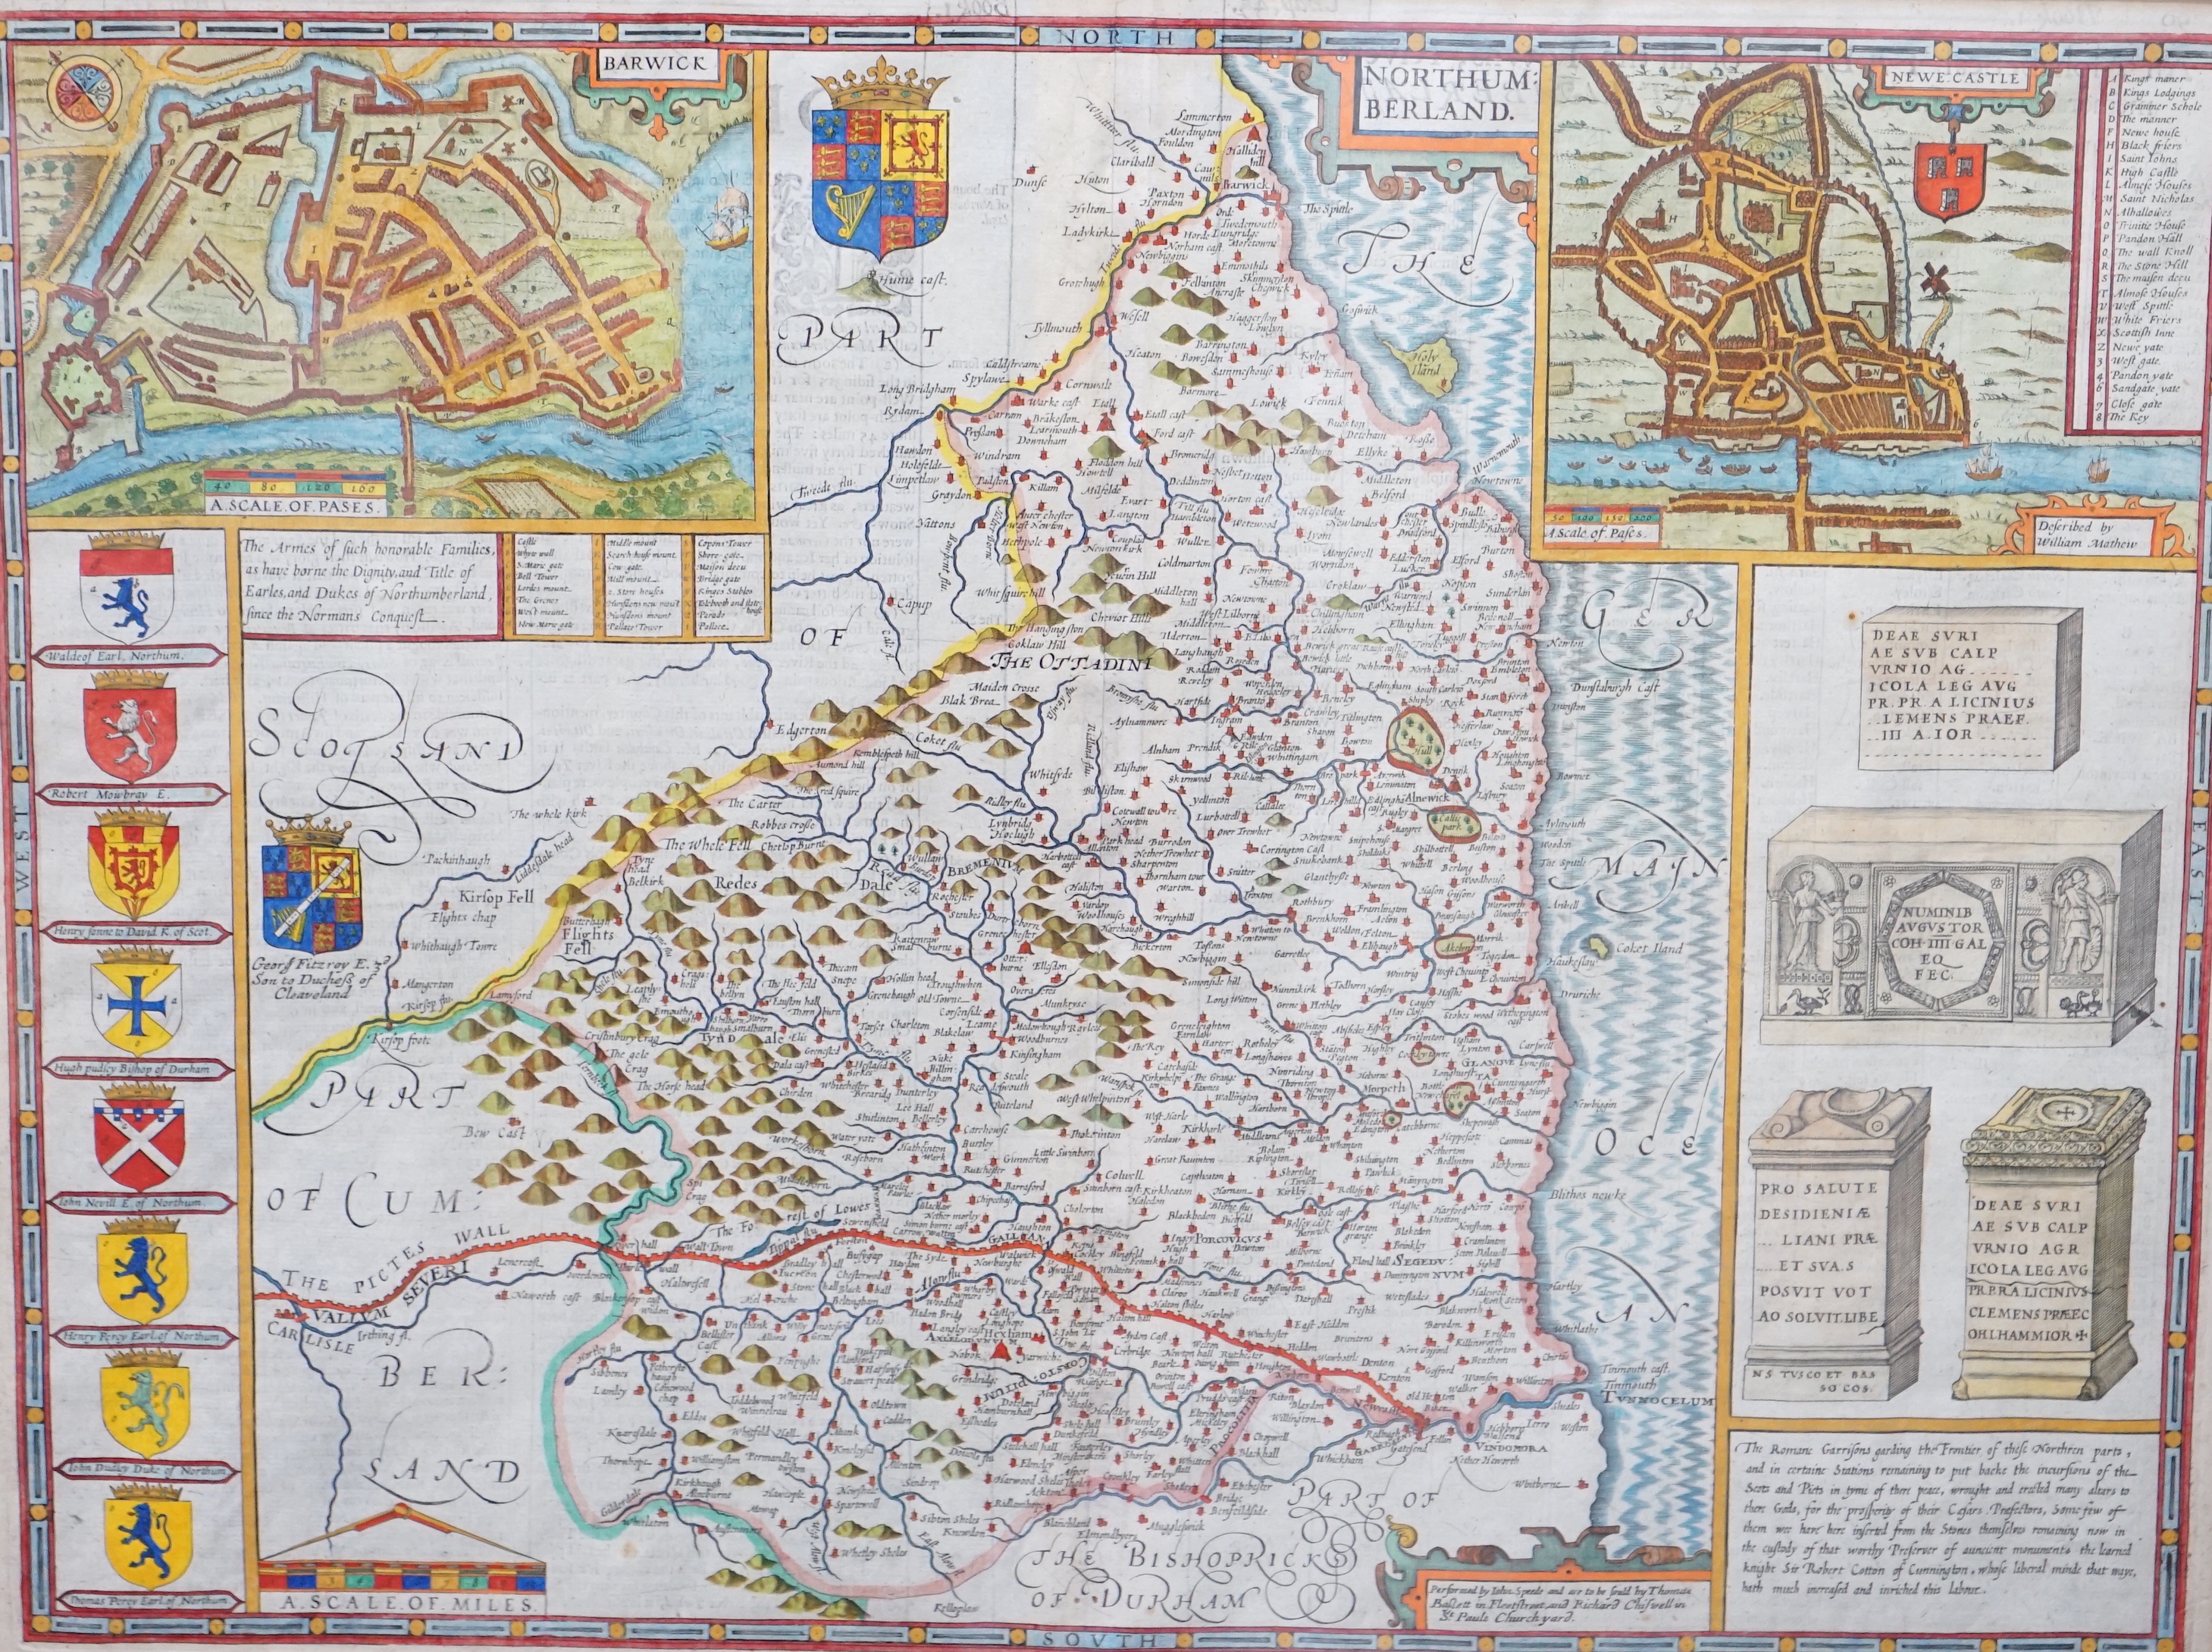 John Speed (1552-1629), hand-coloured engraved map of Northumberland, sold by Thomas Basset and Richard Chiswell, text verso, 39 x 63cm